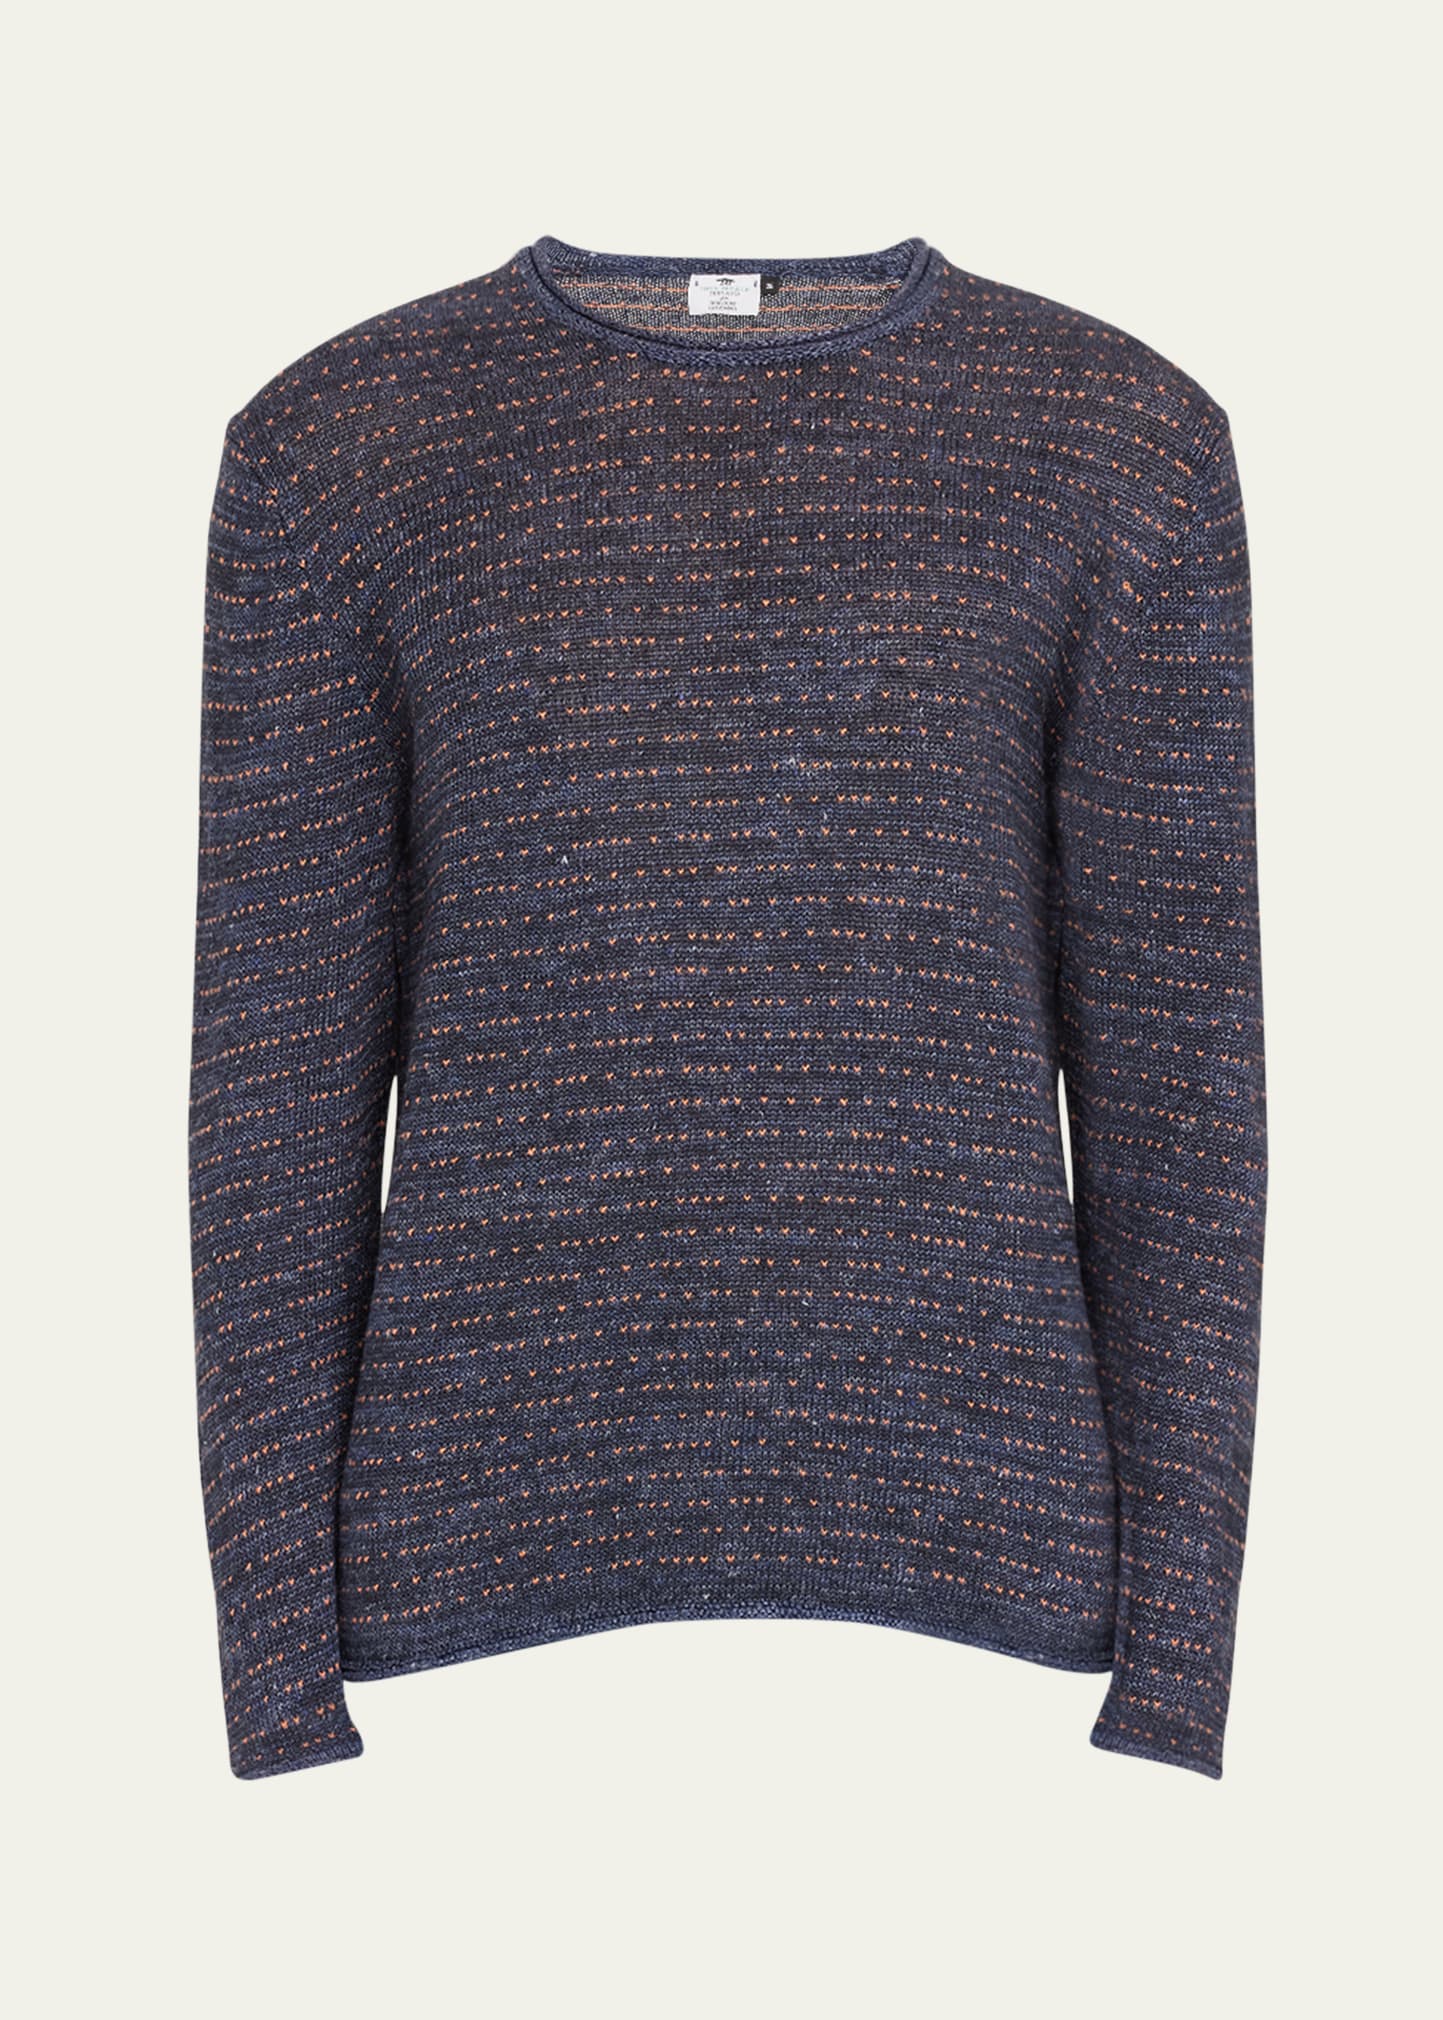 Shop Inis Meain Men's Linen Knit Crewneck Sweater In Navy Mix